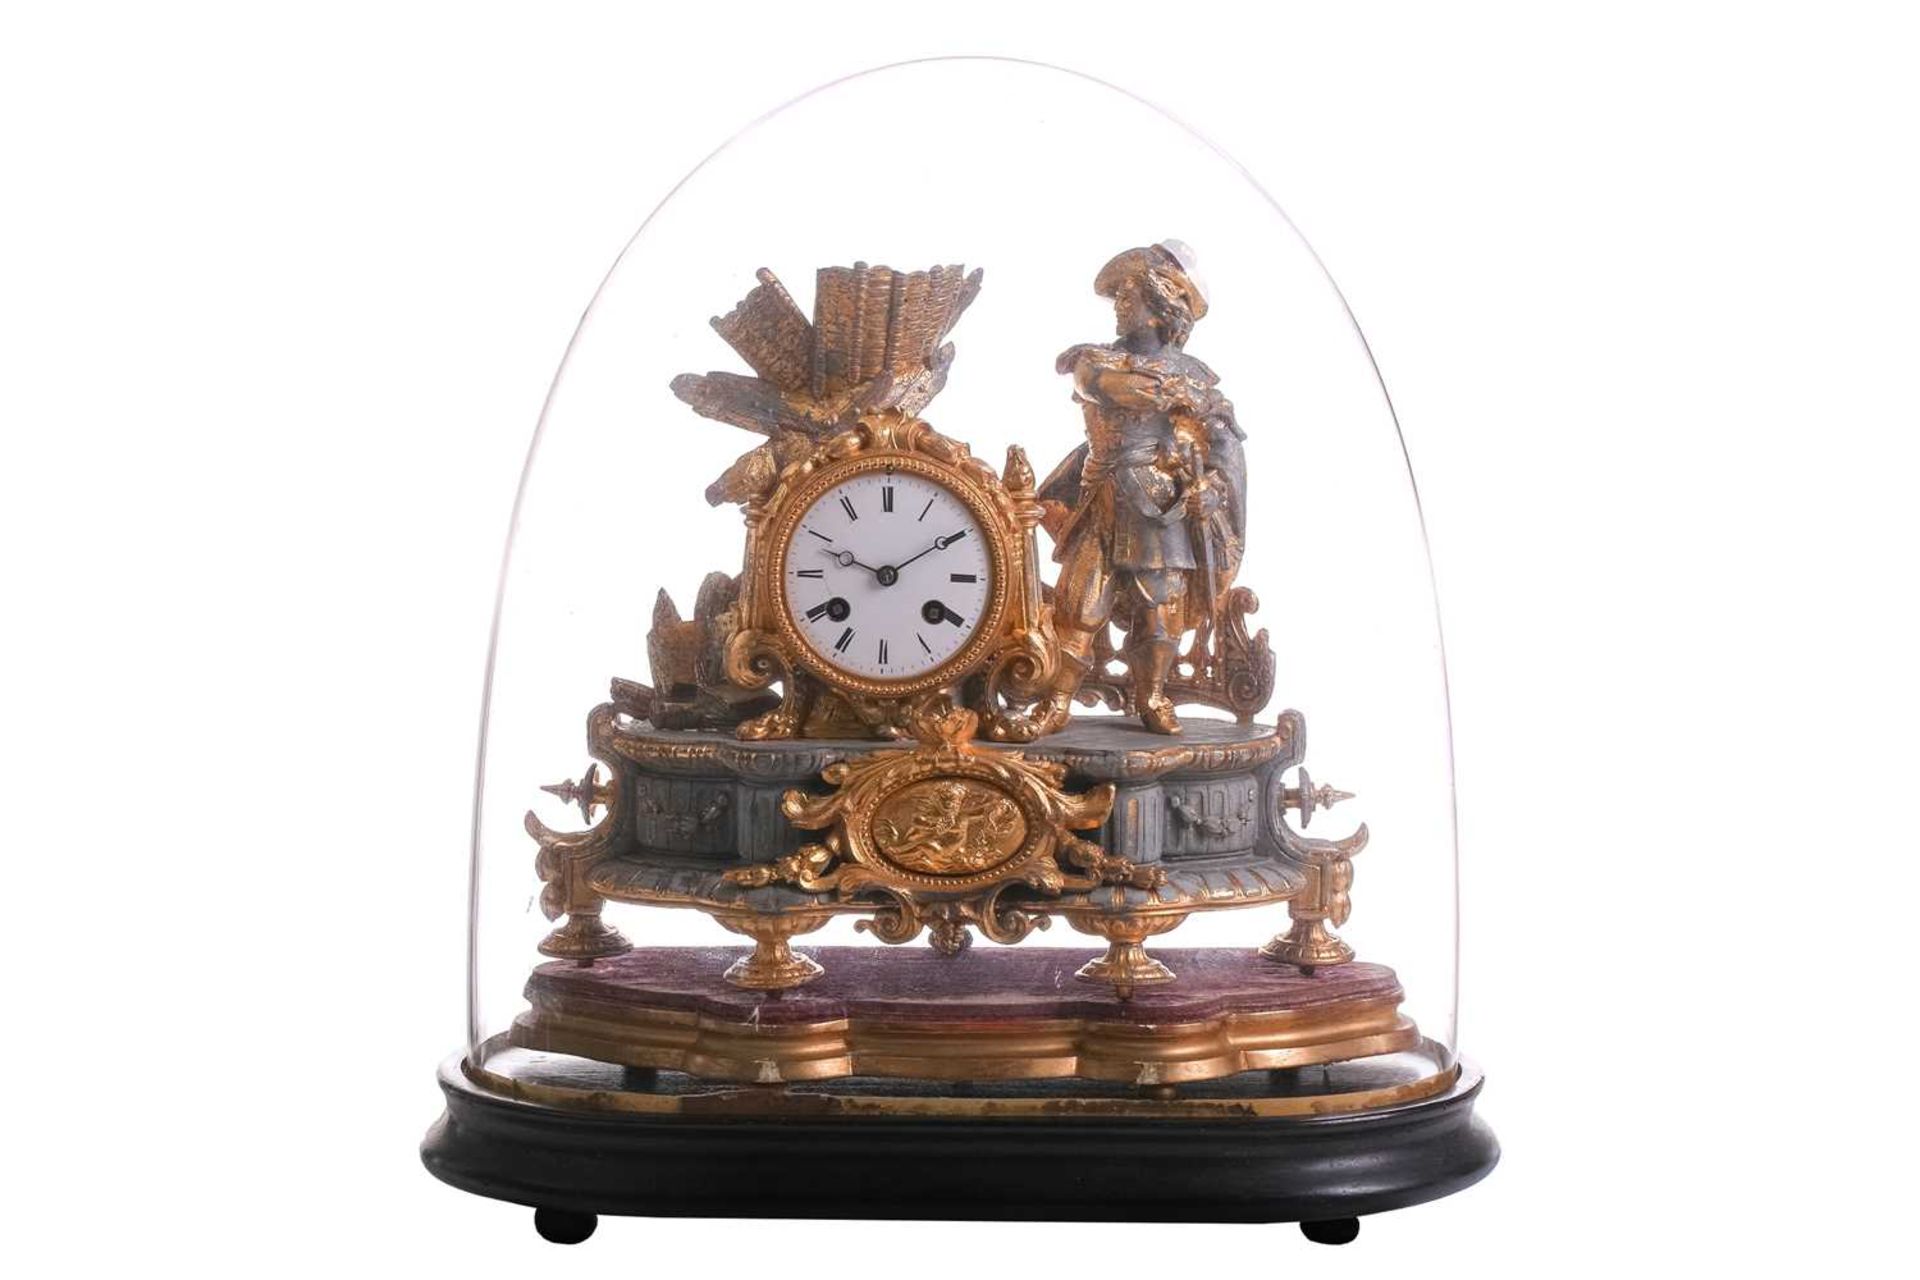 A late 19th century French parcel gilt spelter clock, depicting a nobleman standing beside a drum